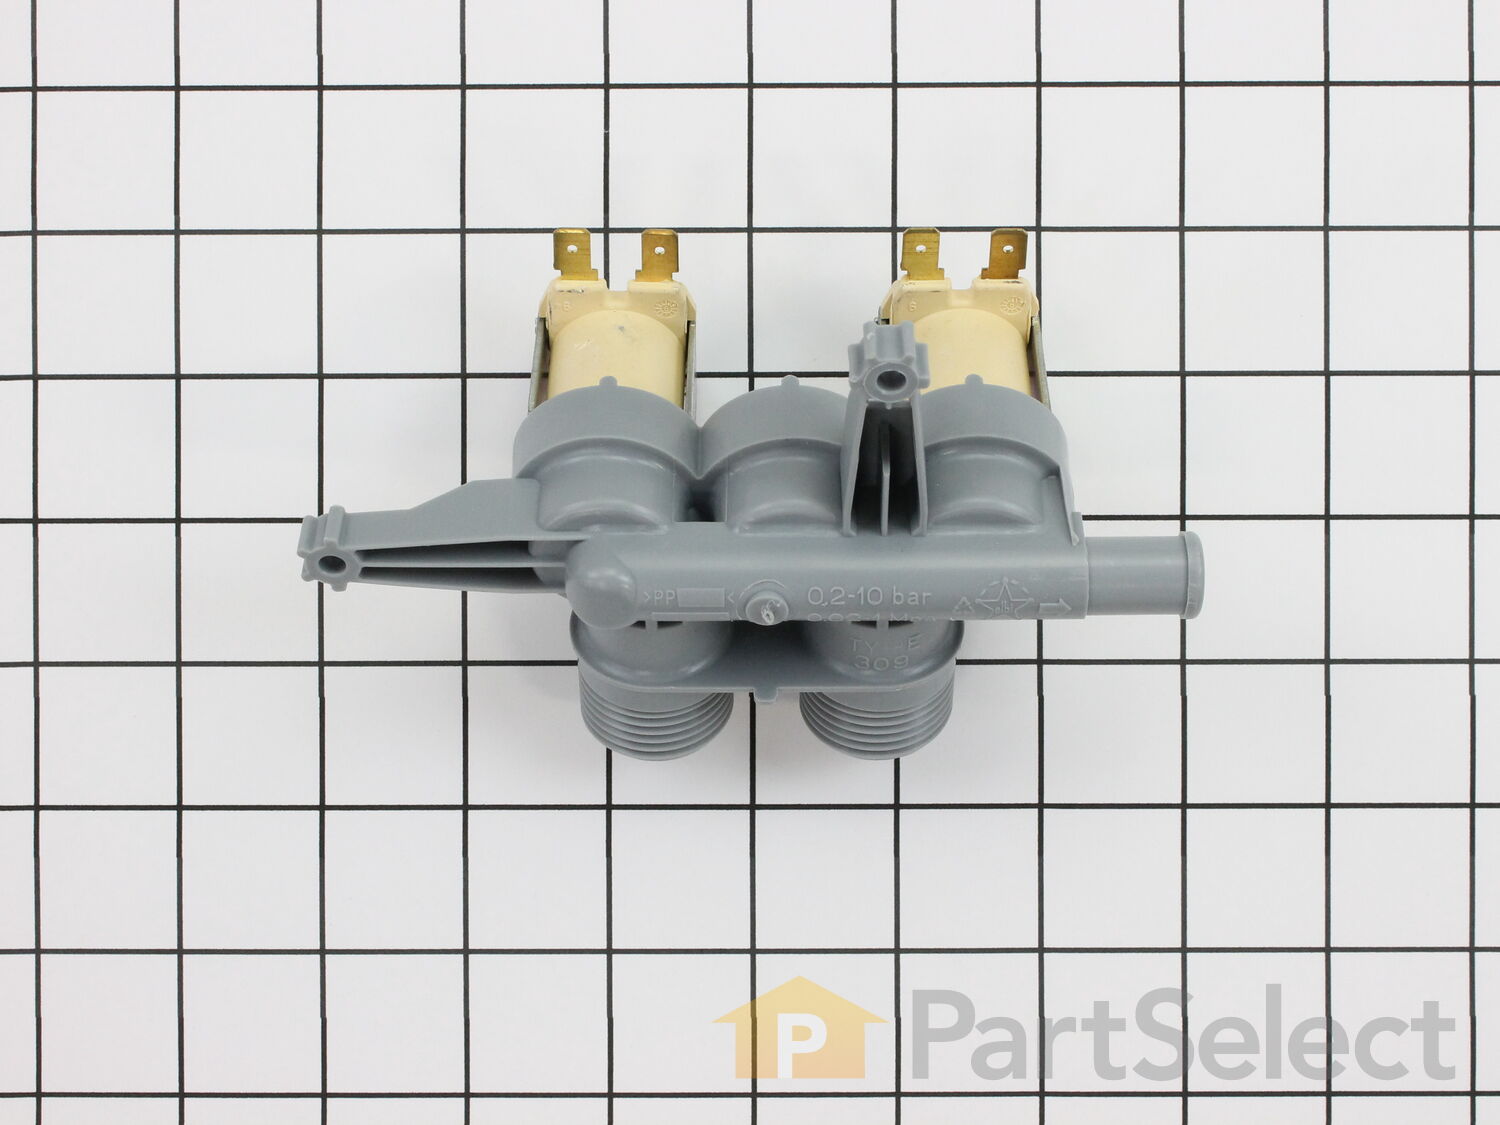 Water Inlet Valve for GE General Electric Washing Machine Washer WH13X10037 